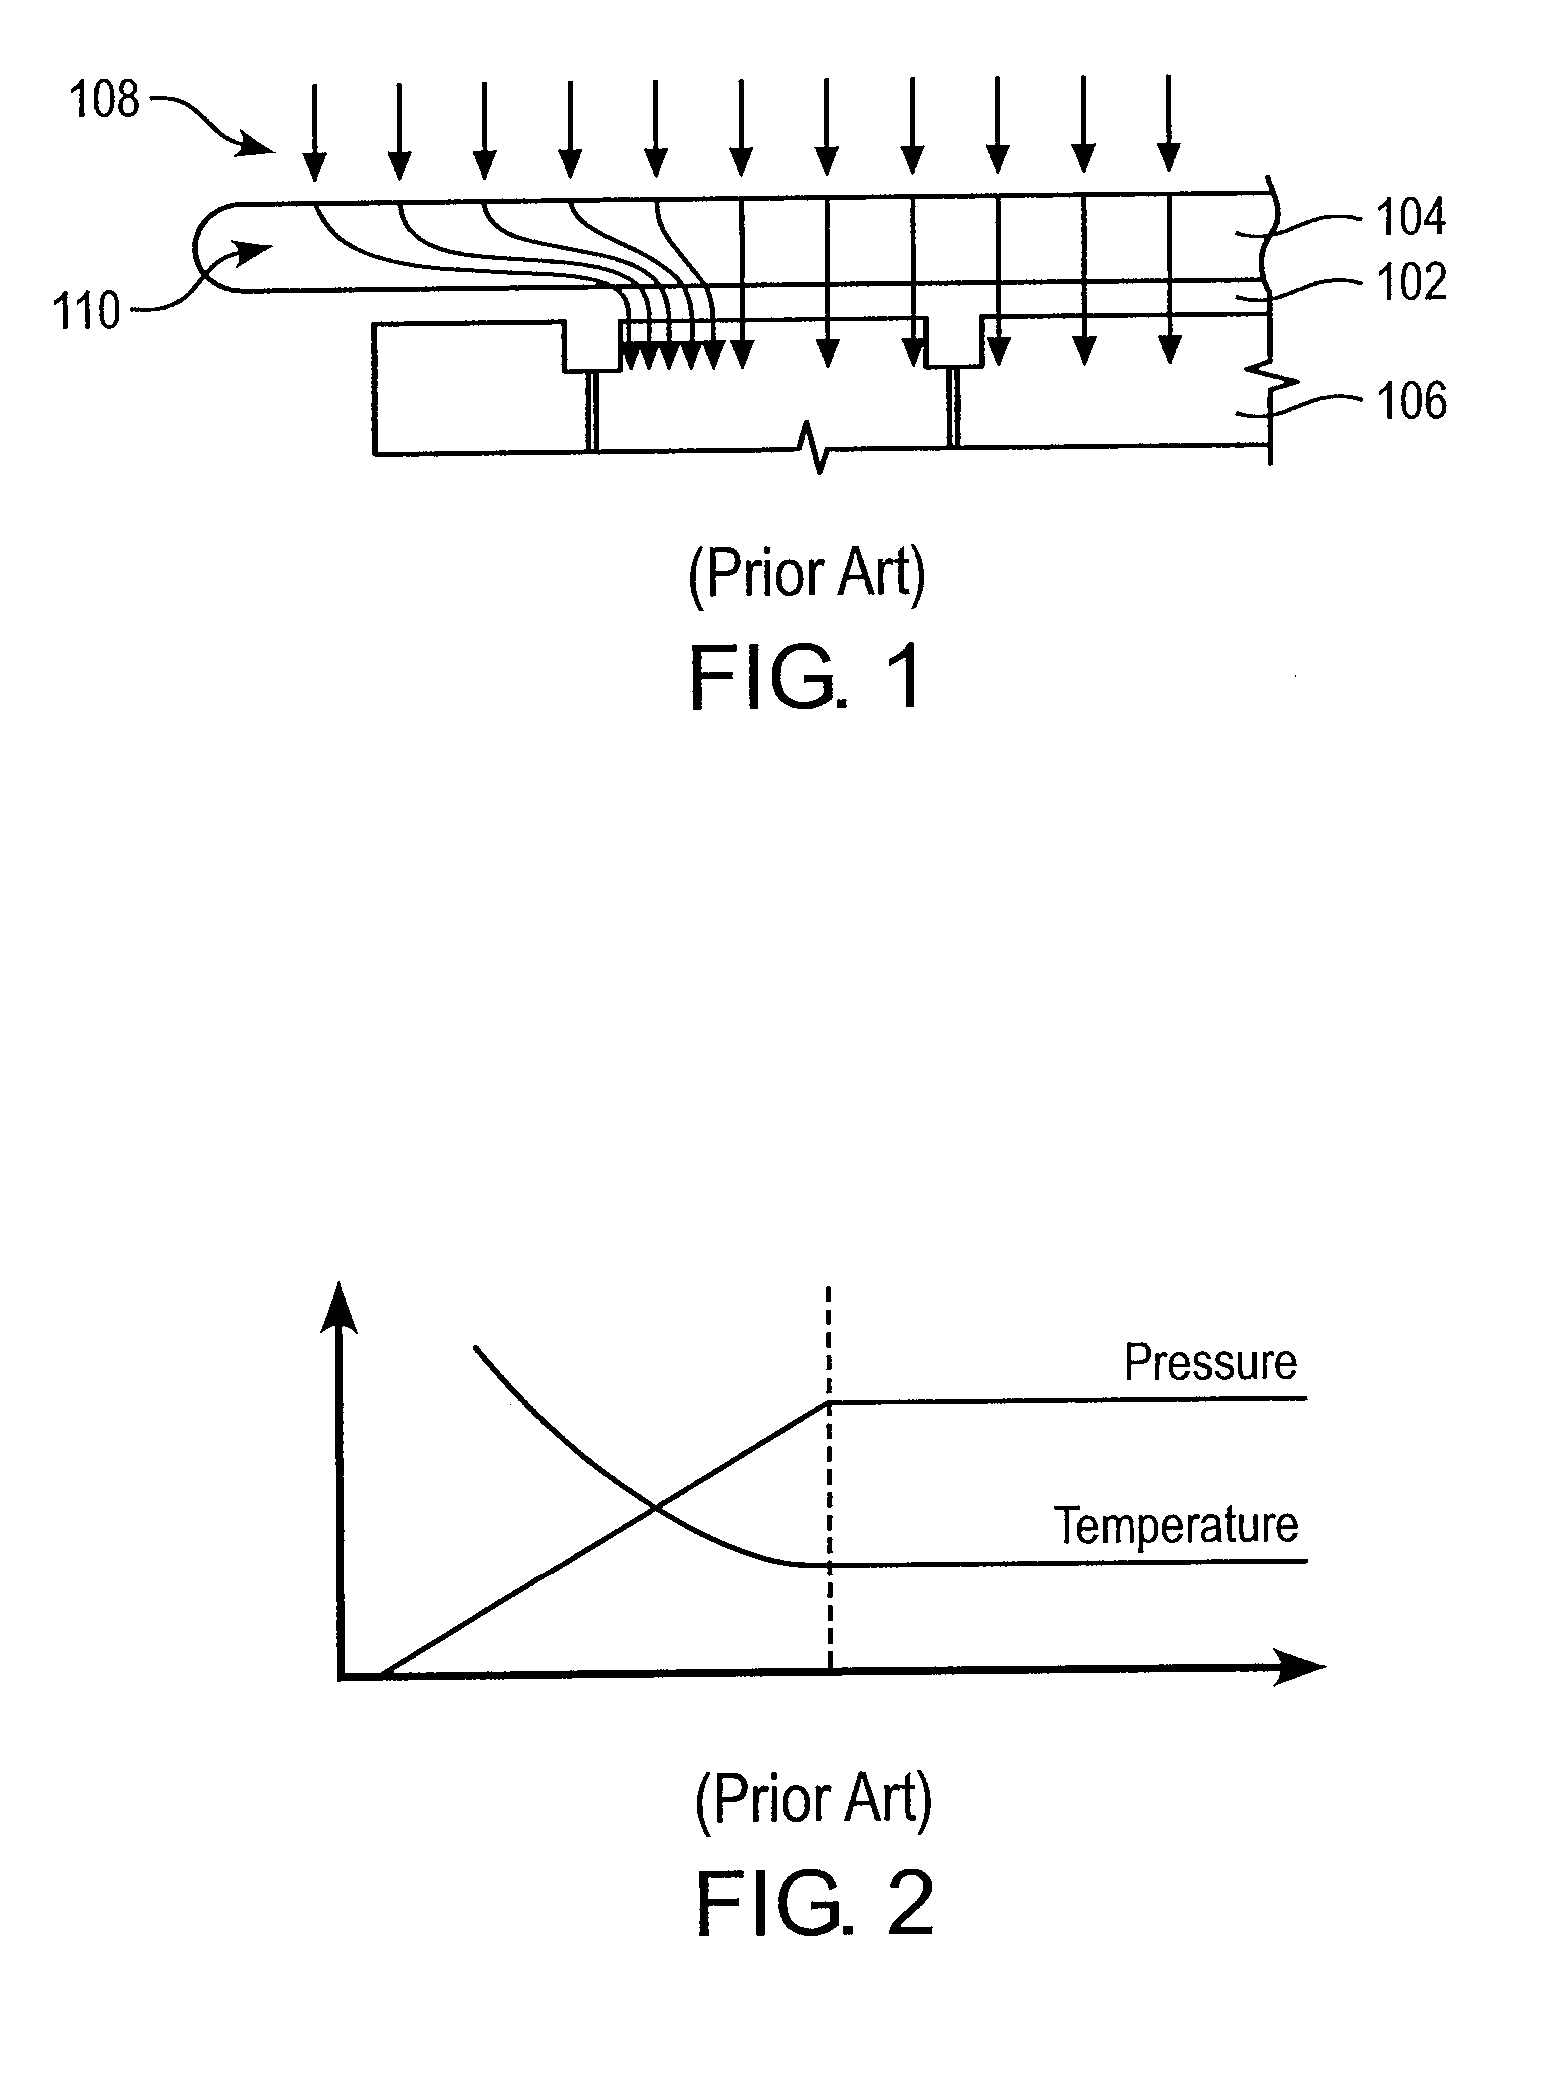 Method for controlling spatial temperature distribution across a semiconductor wafer